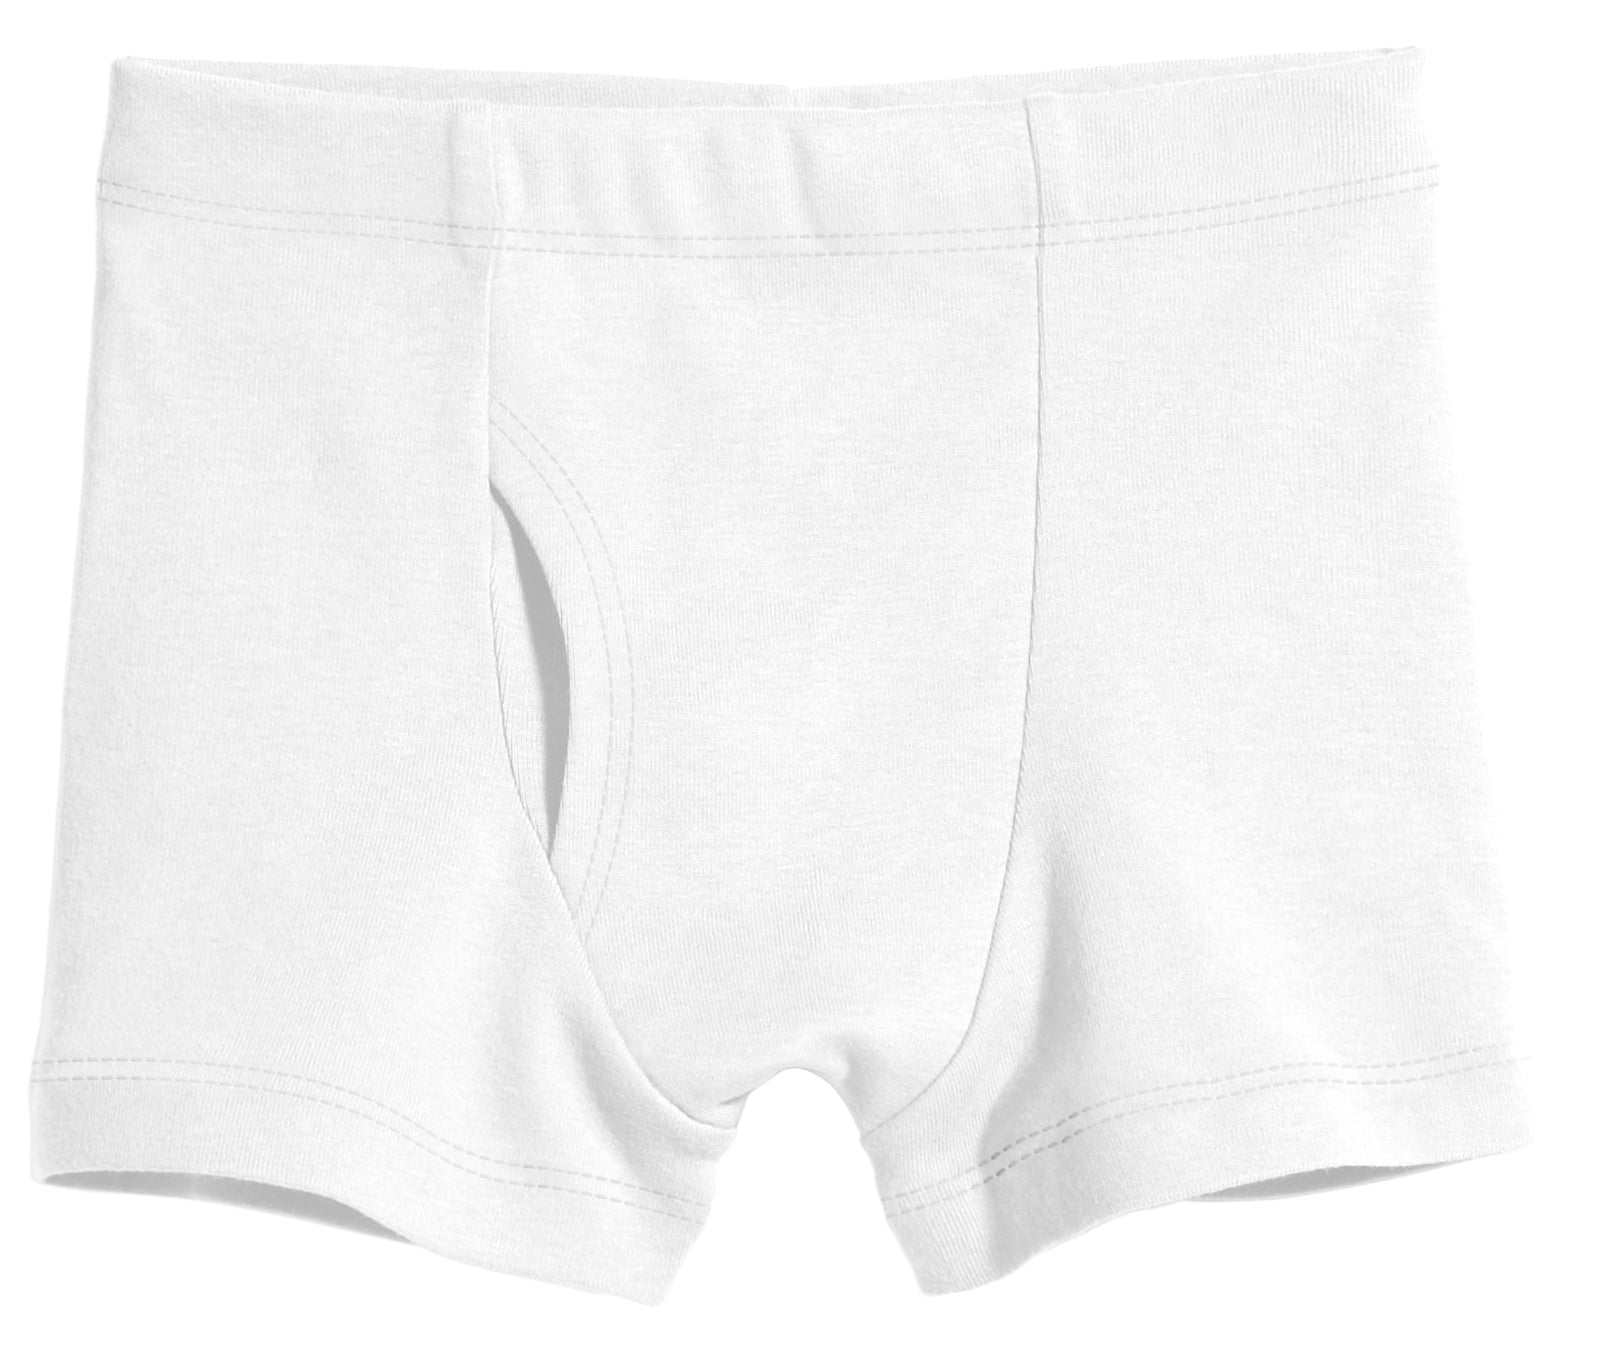 City Threads Boys All Cotton Briefs Underwear 3-Pack For Sensitive Skin -  Made in USA